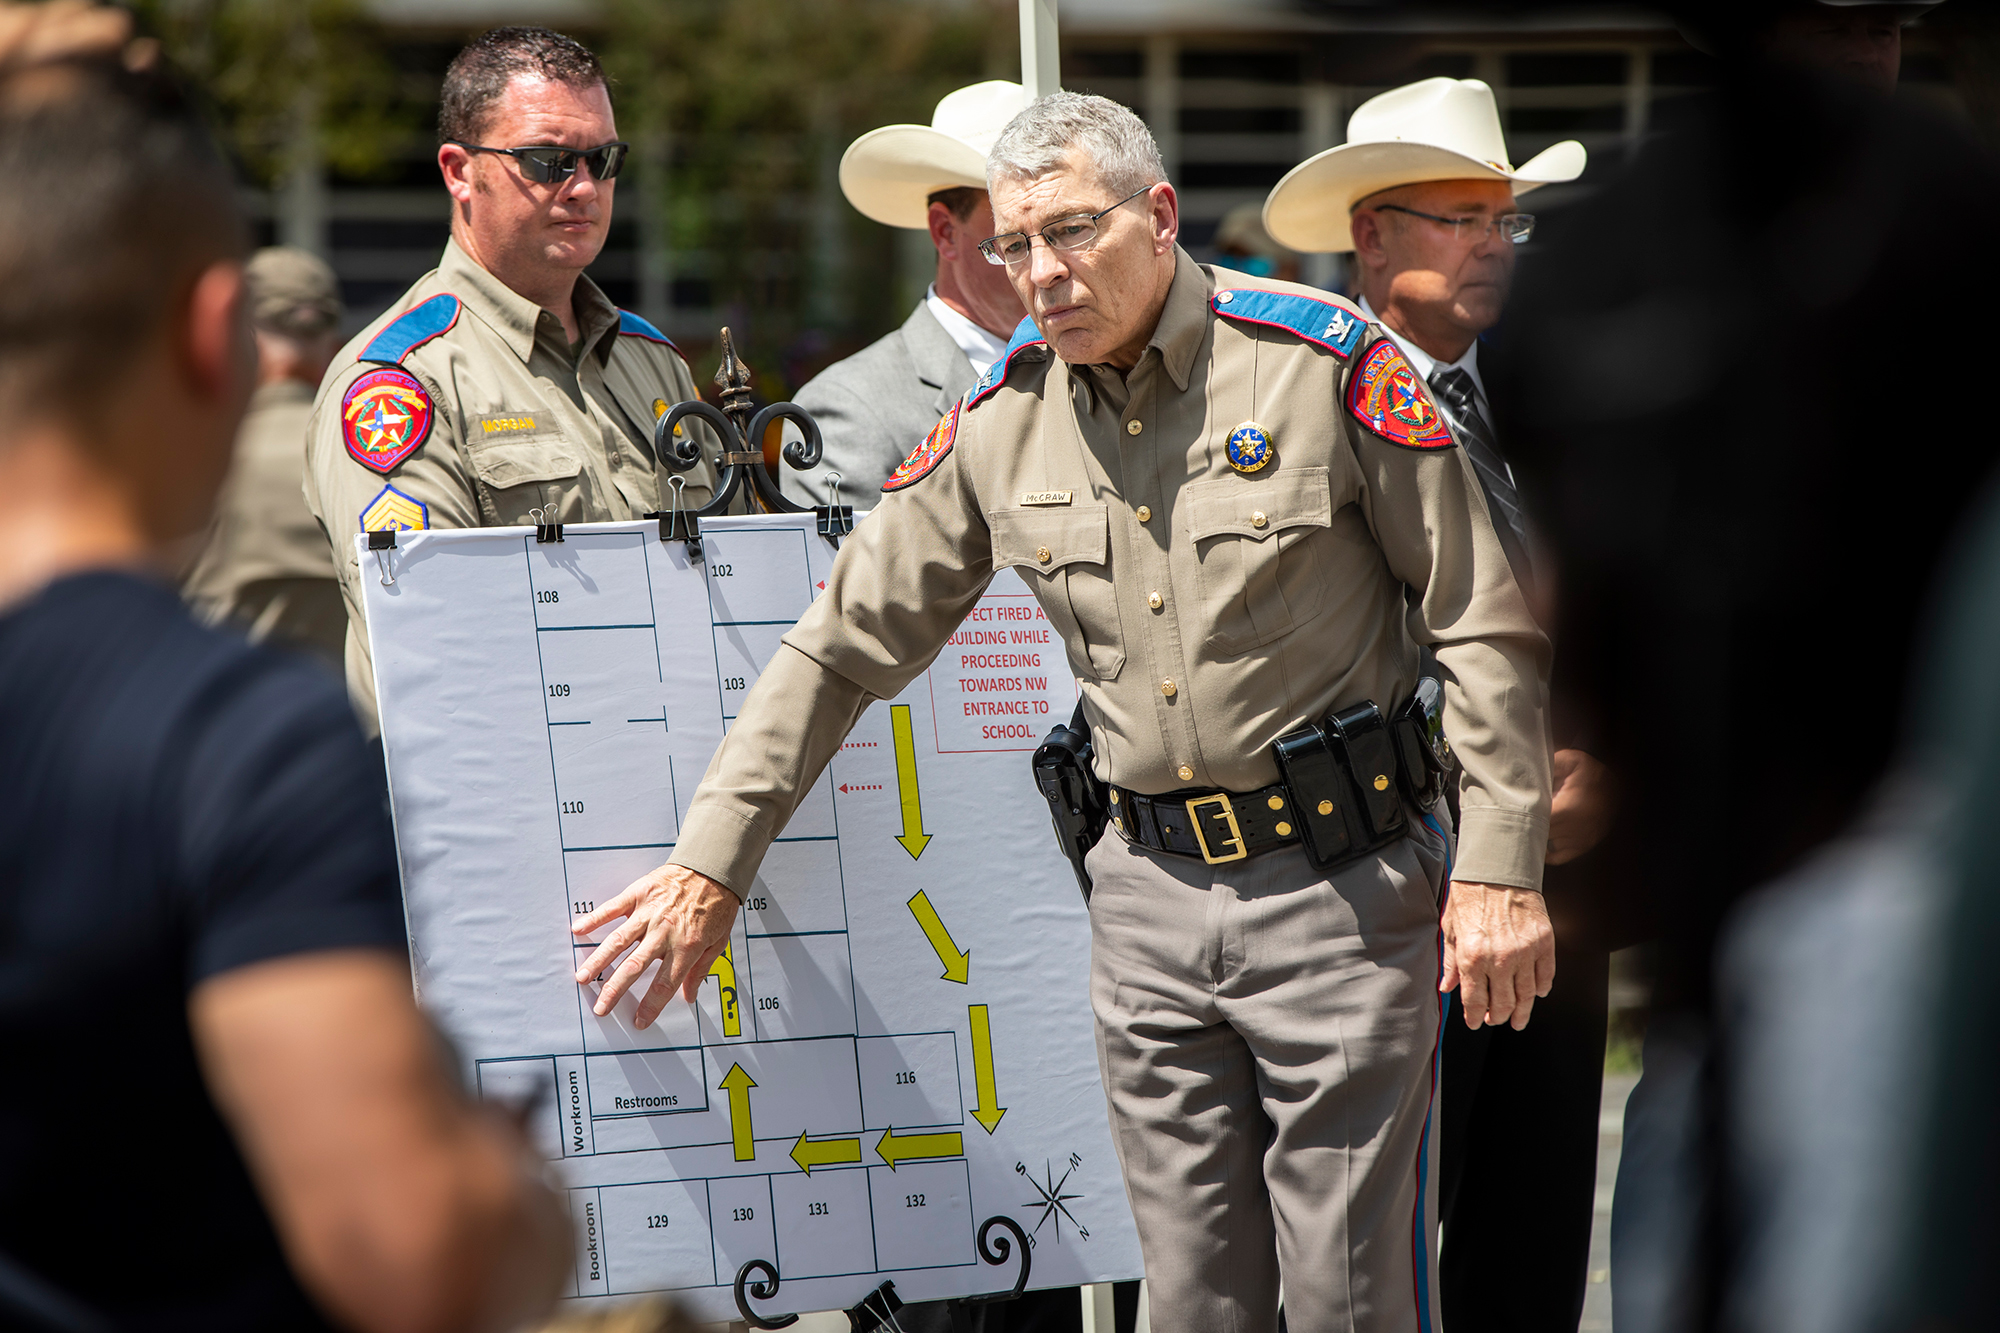 Steven McCraw, the Director and Colonel of the Texas Department of Public Safety, points to a map of the shooter’s movements during a press conference in front of Robb Elementary School where a deadly shooting left 19 children and two teachers dead, in Uvalde, Texas, on Friday, May 27.